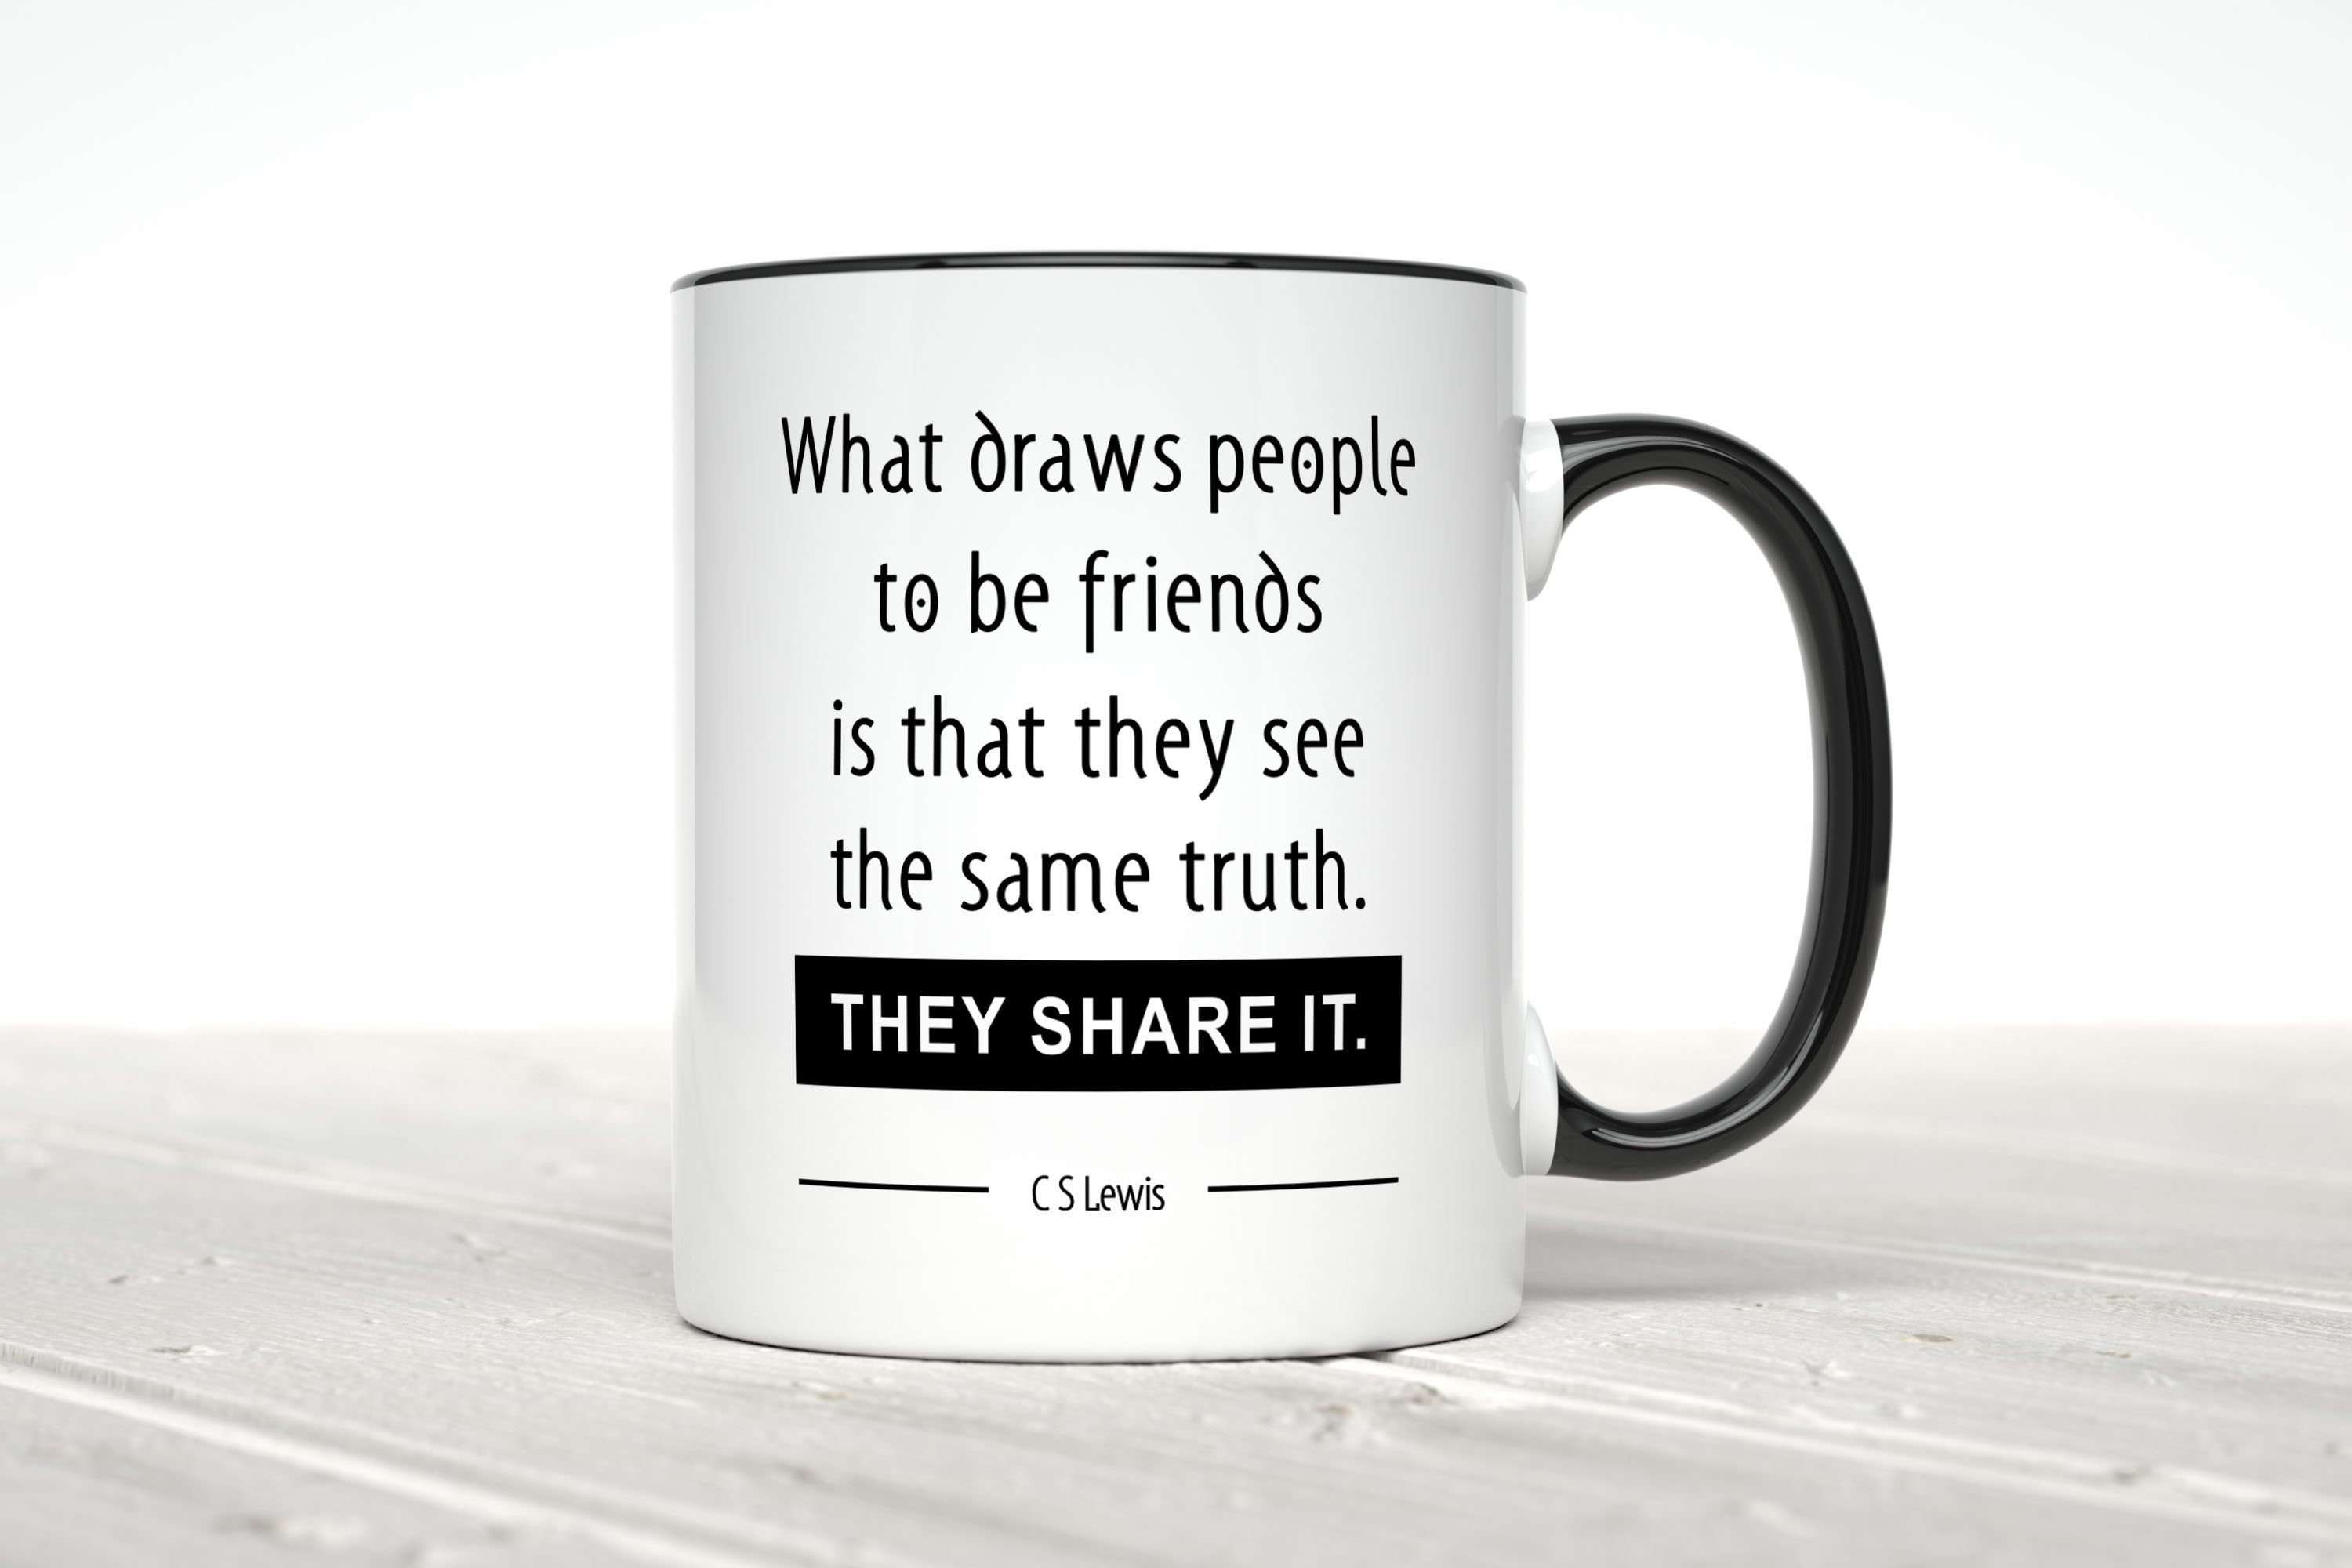 C.S. Lewis Quote Coffee Mug, What Draws People To Be Friends